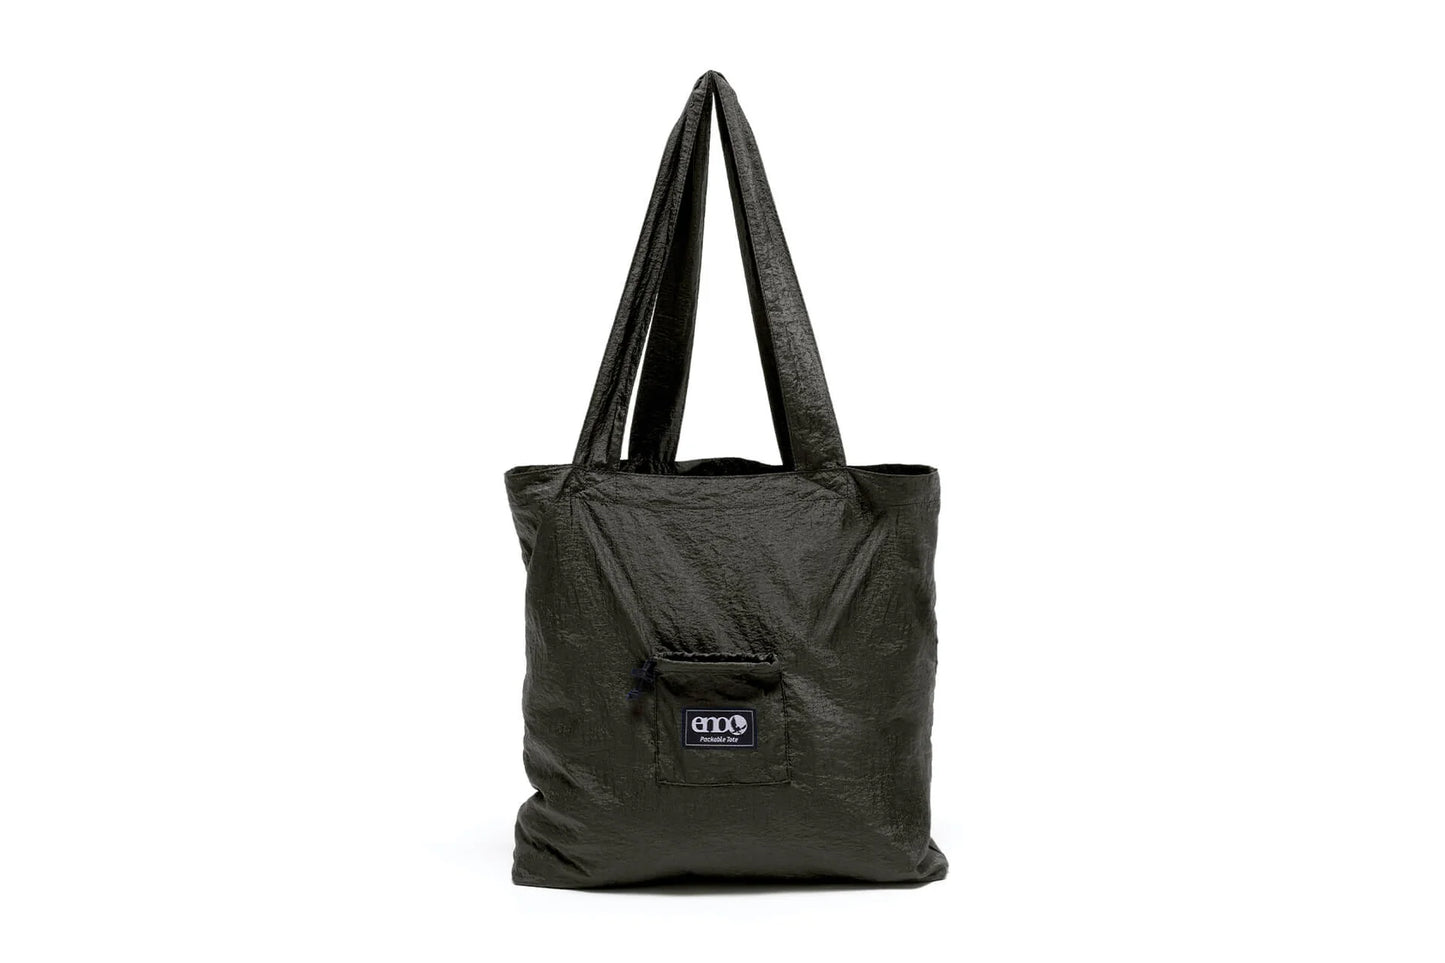 【F/CE.】PACKABLE TOTE